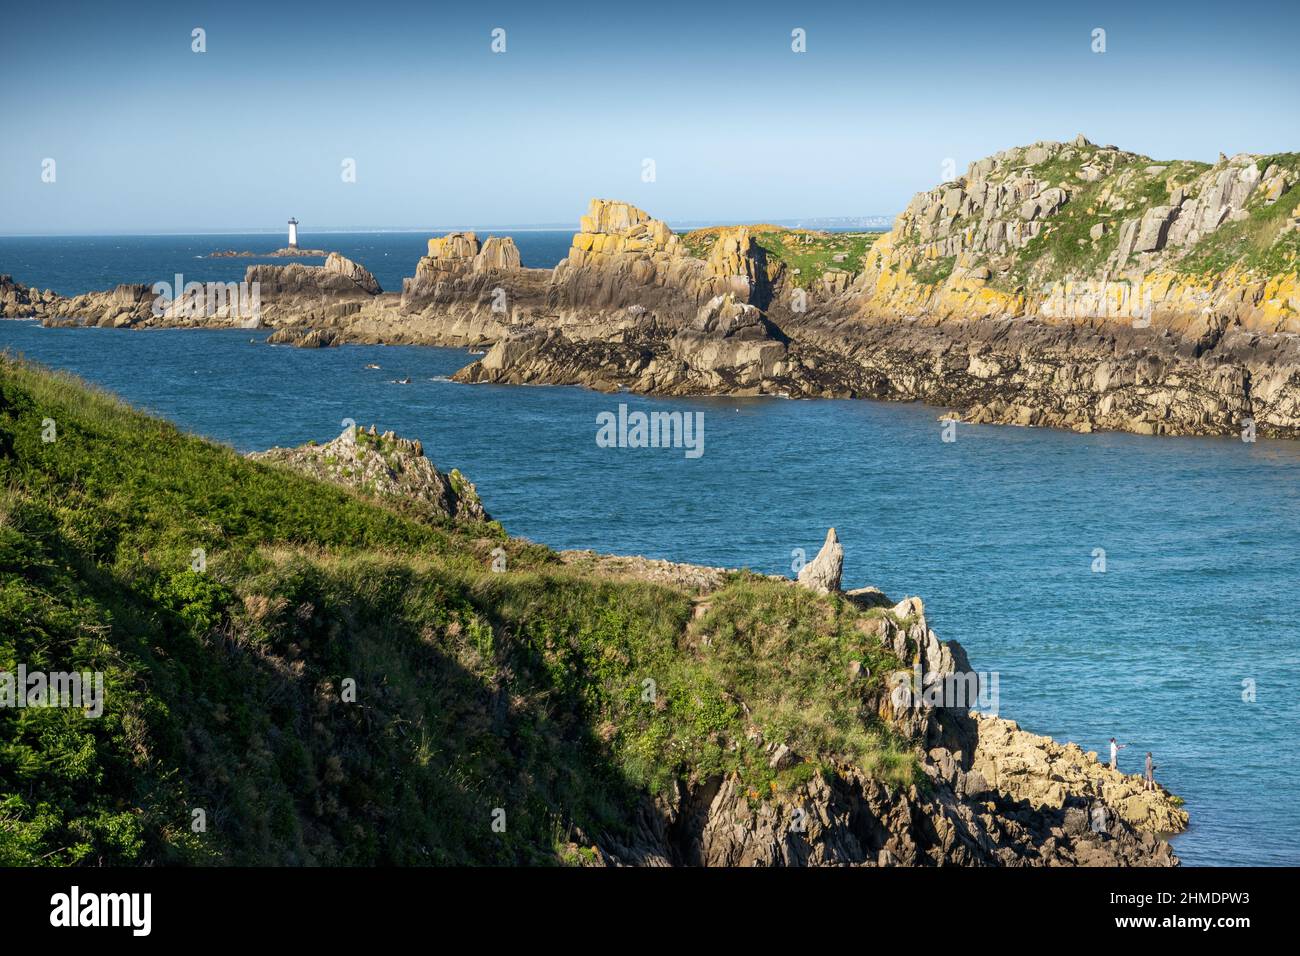 Distant view of lighthouse with cliff on sea, Brittany, France Stock Photo